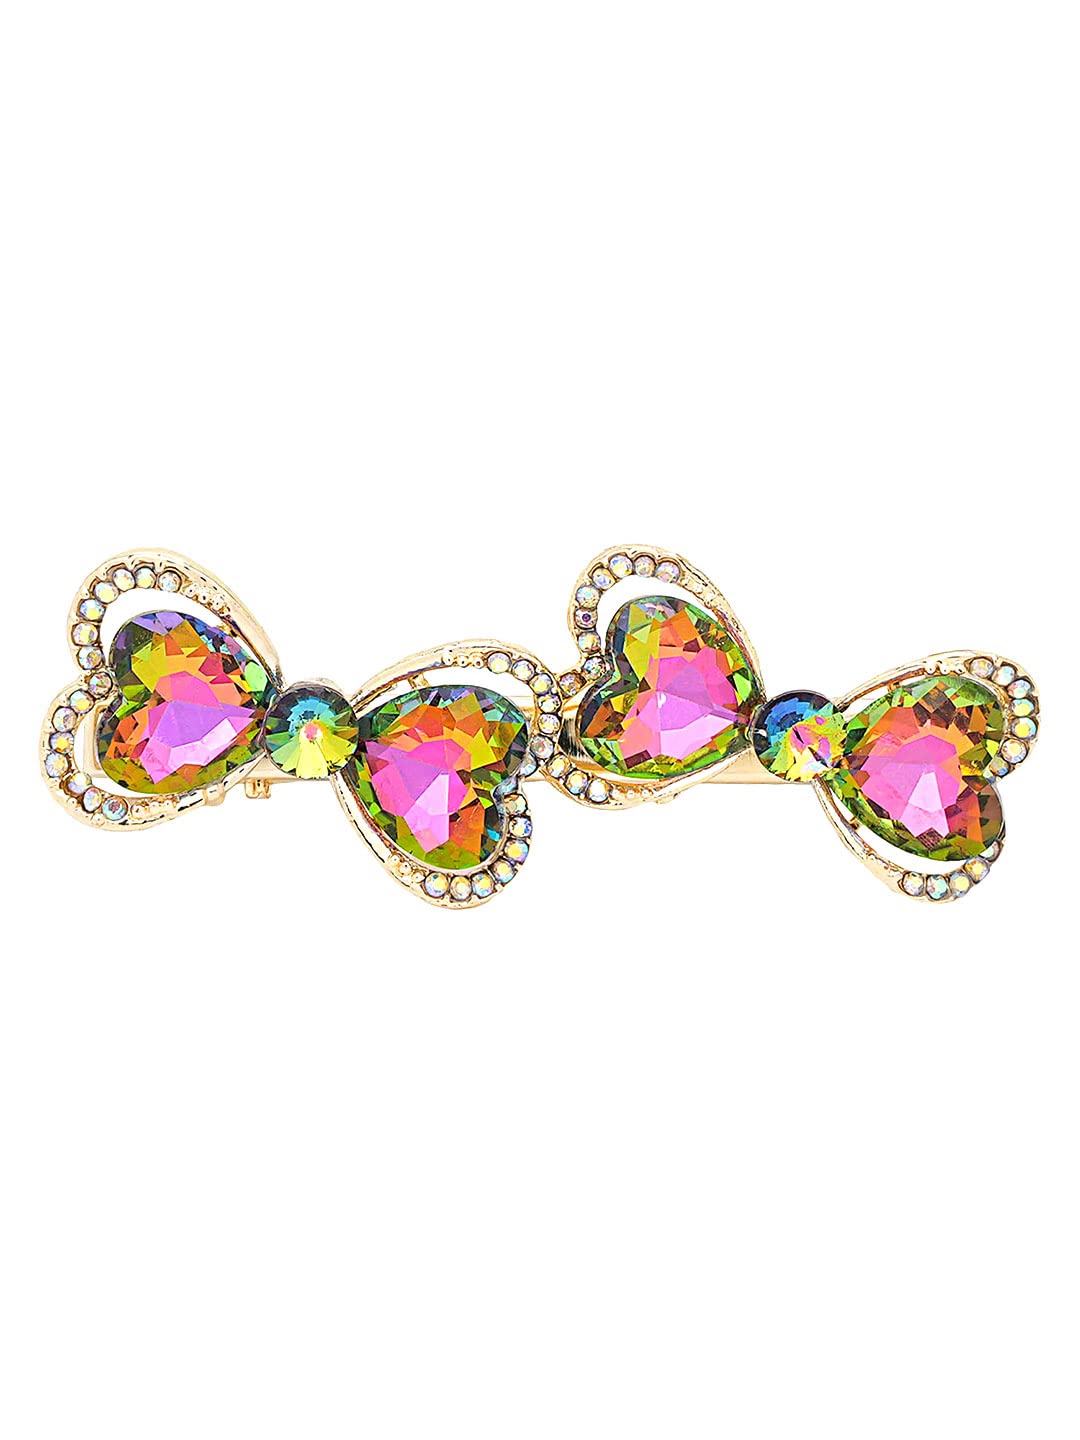 Yellow Chimes Hair Clips for Women Girls Hair Accessories for Women Purple Crystal Hair Clip Bow Hair Clips for Girls Hairclips Alligator Clips for Hair Pins for Women and Girls Gift for Women & Girls